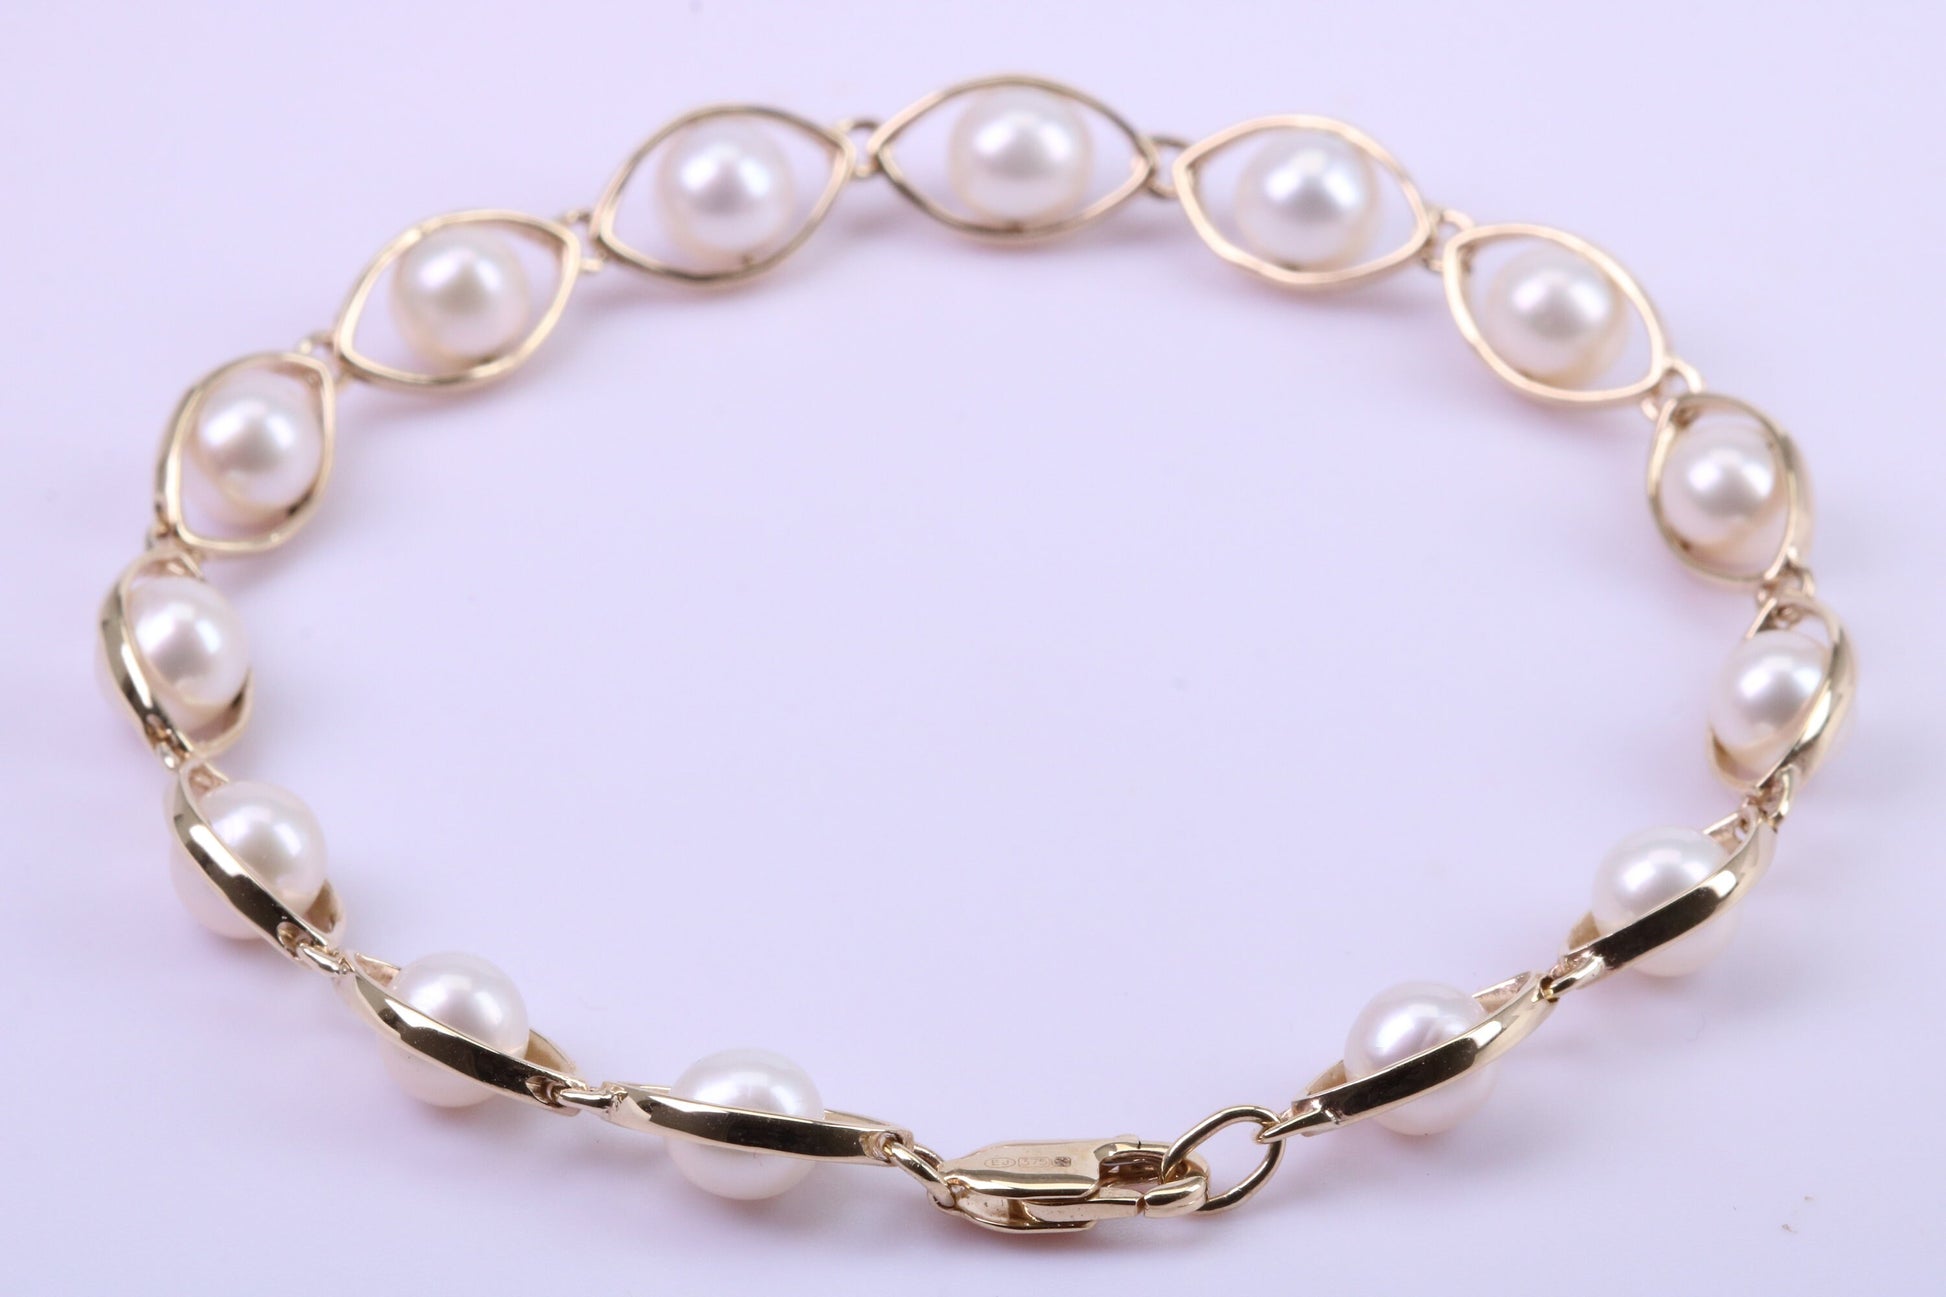 Stunning Natural Freshwater Pearl Bracelet set in Solid Yellow Gold